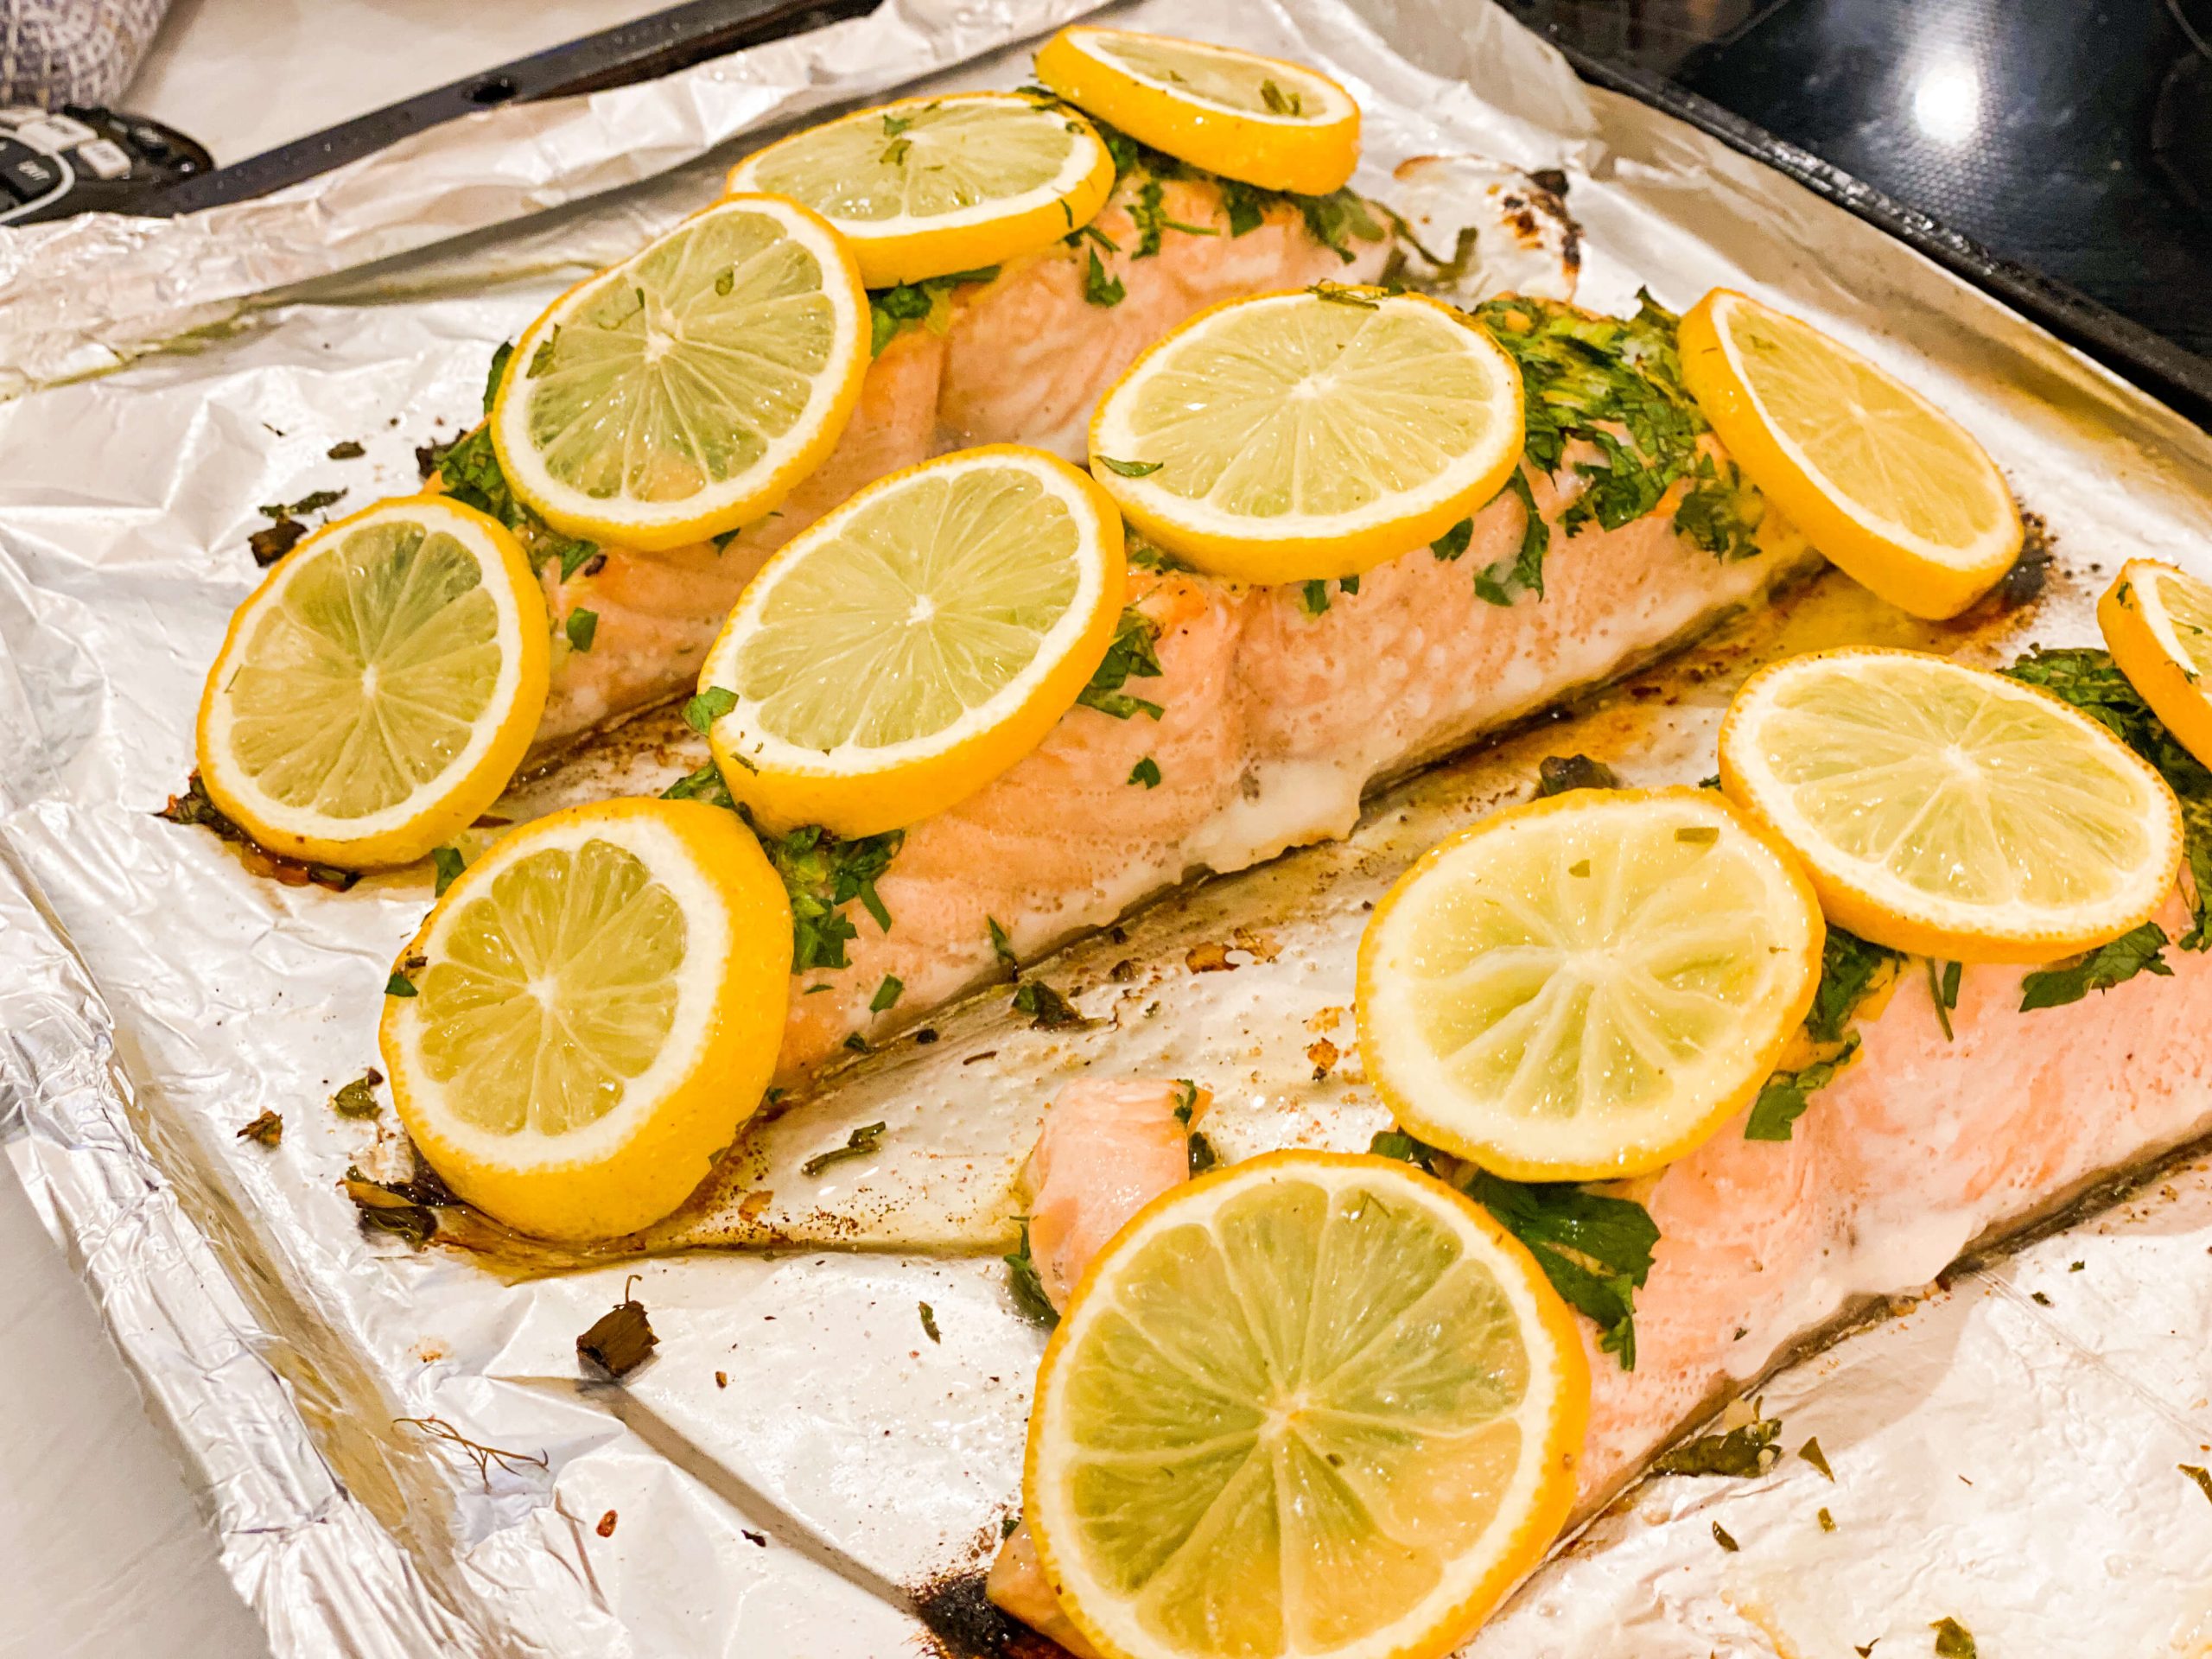 cooked salmon with herbs, mustard and lemon slices